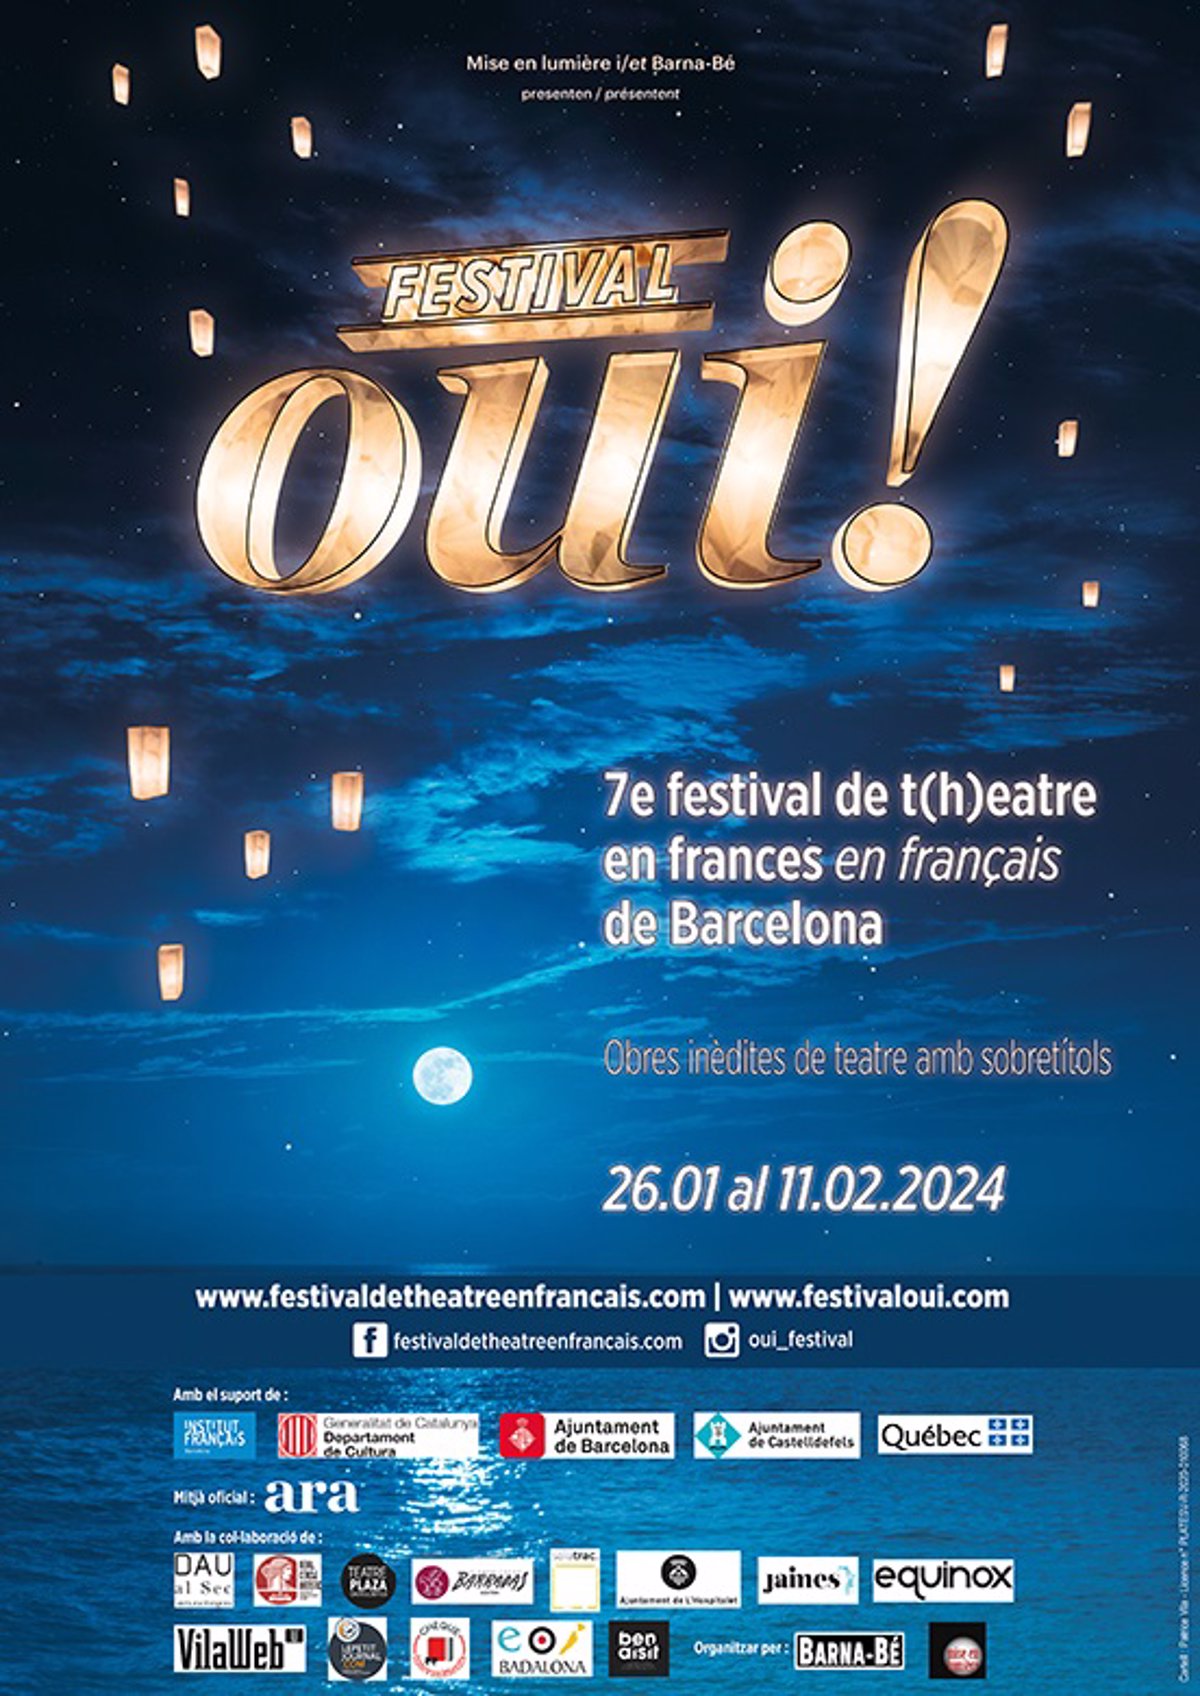 Awesome festival!  De Barcelona programs eight French-language theatrical works unpublished in Spain